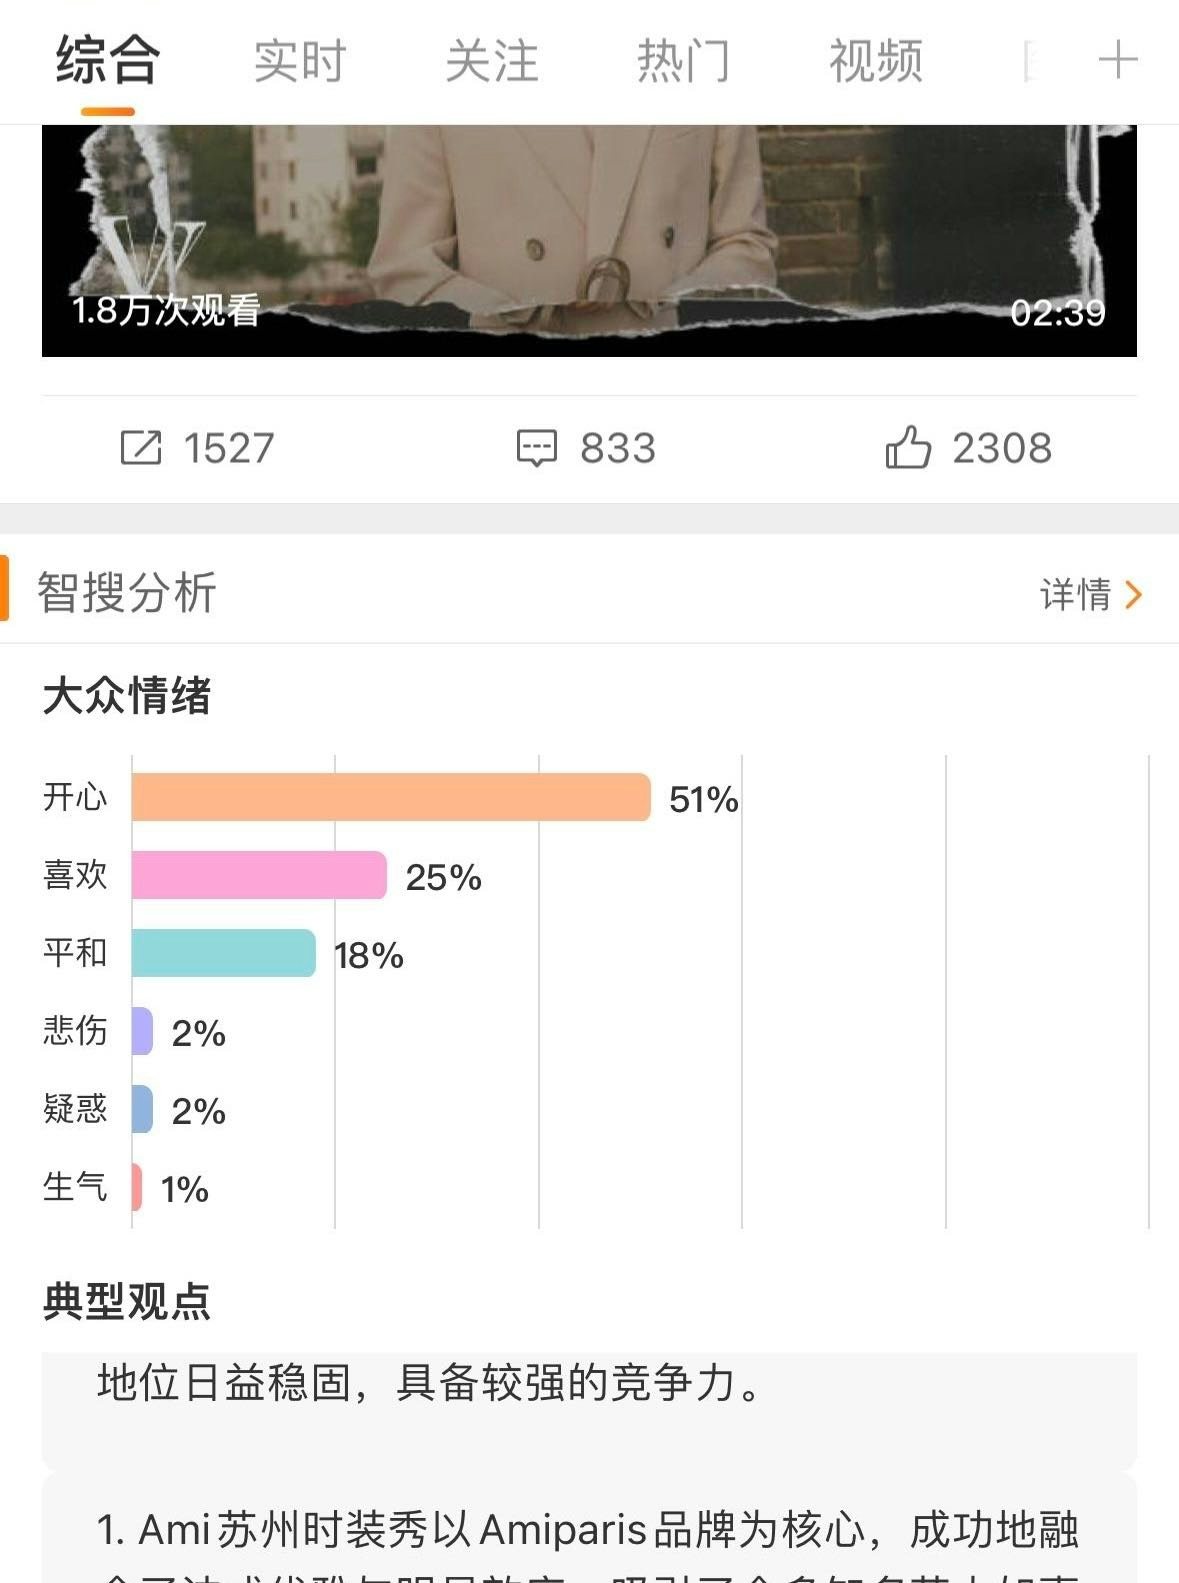 Weibo analytics showed that the majority of responses to the Ami Paris show were positive. Image: Weibo